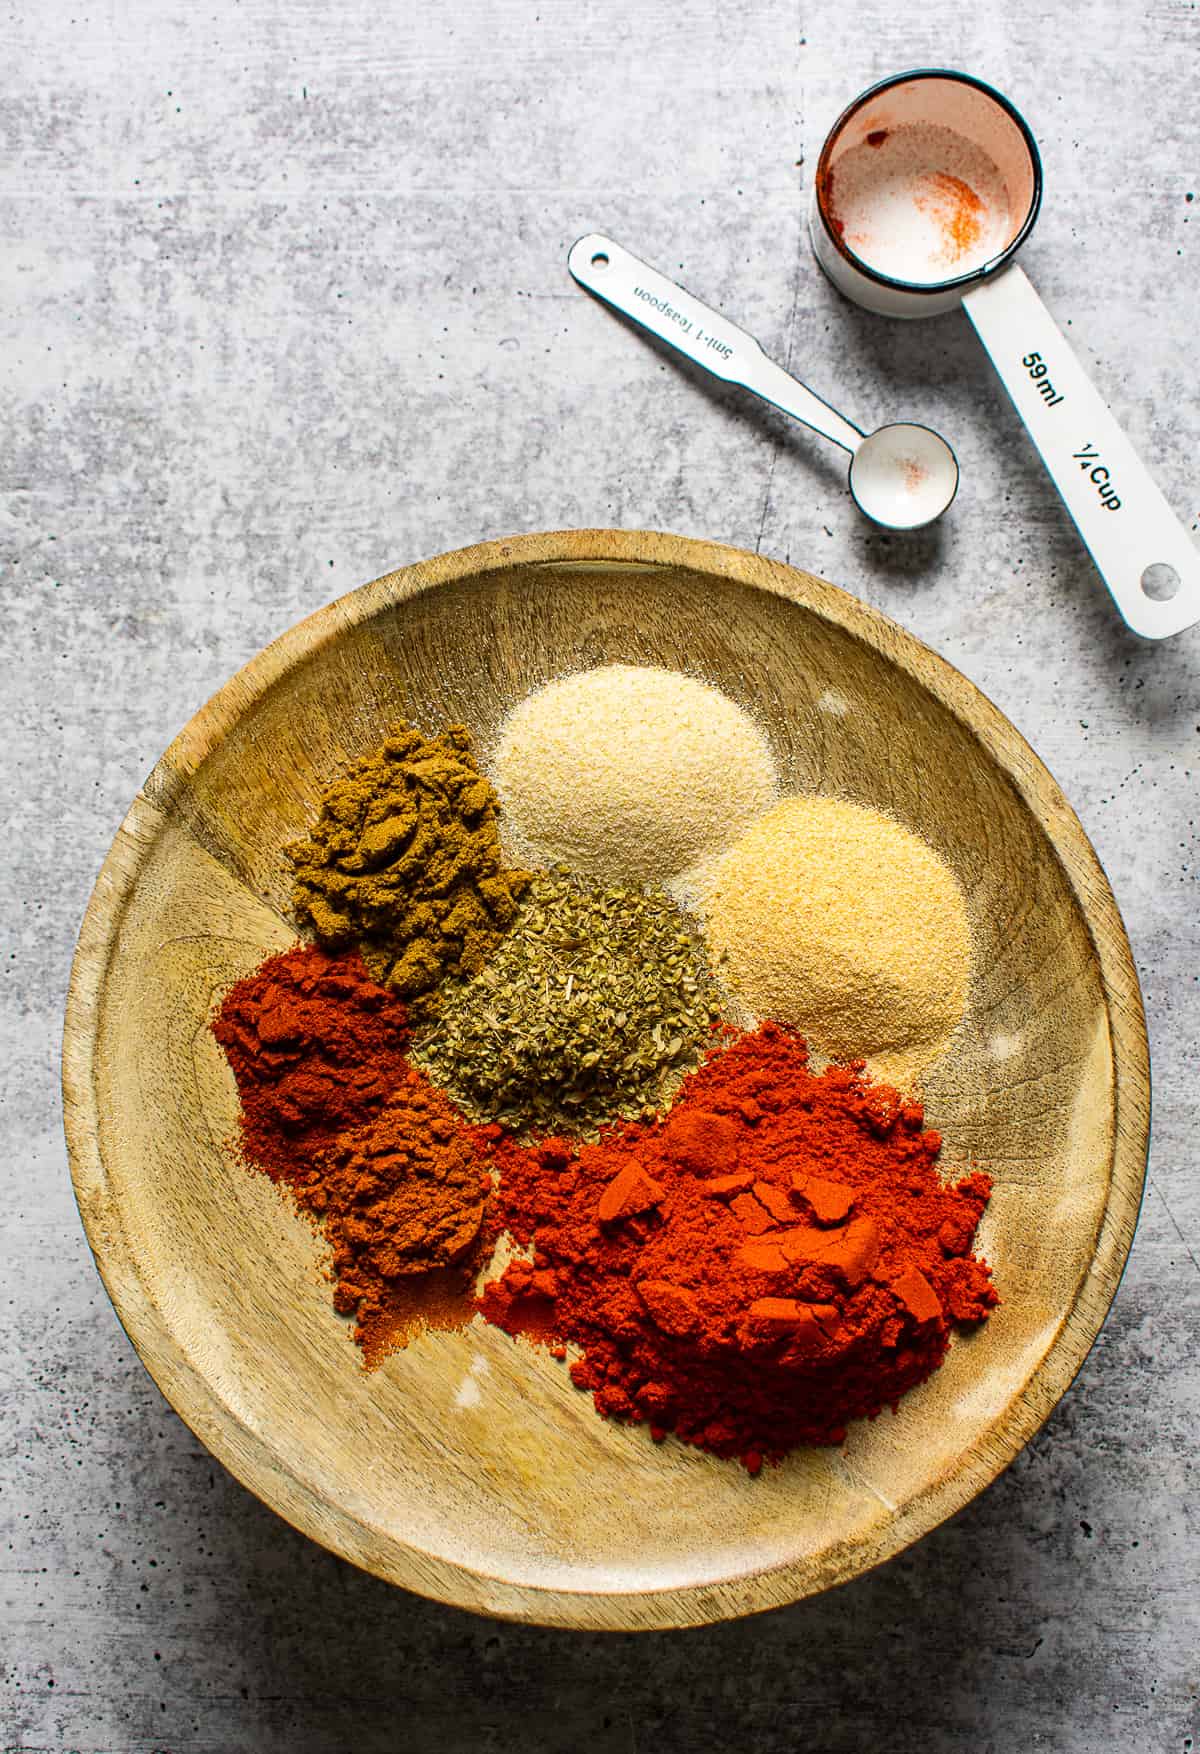 chili powder ingredients on wooden plate